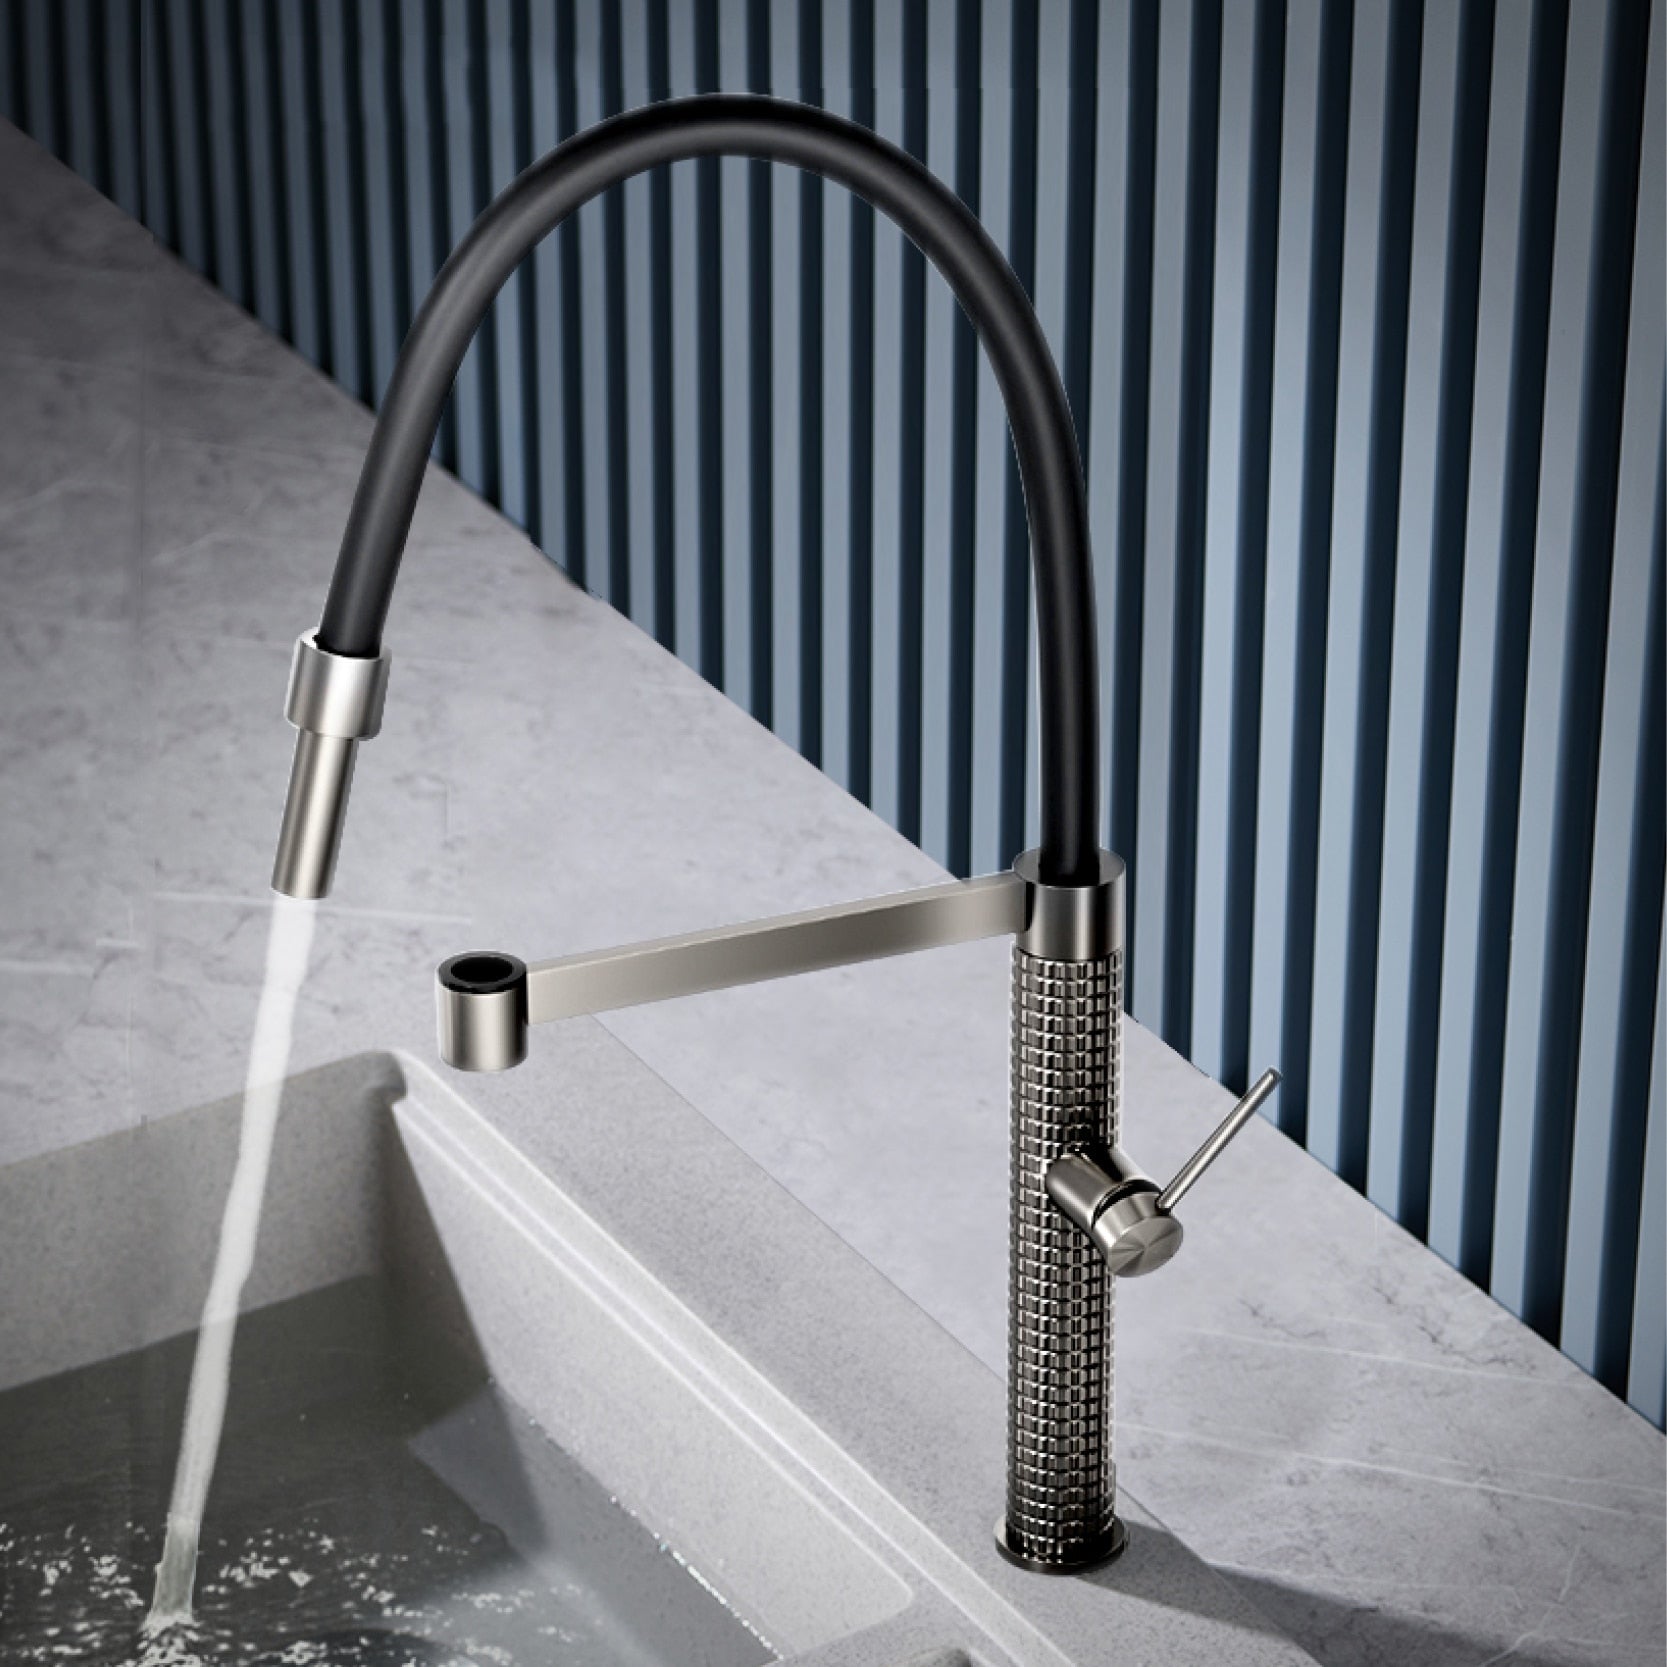 Pull Out Sink Tap Single Handle Faucet Cold and Hot Control Faucet